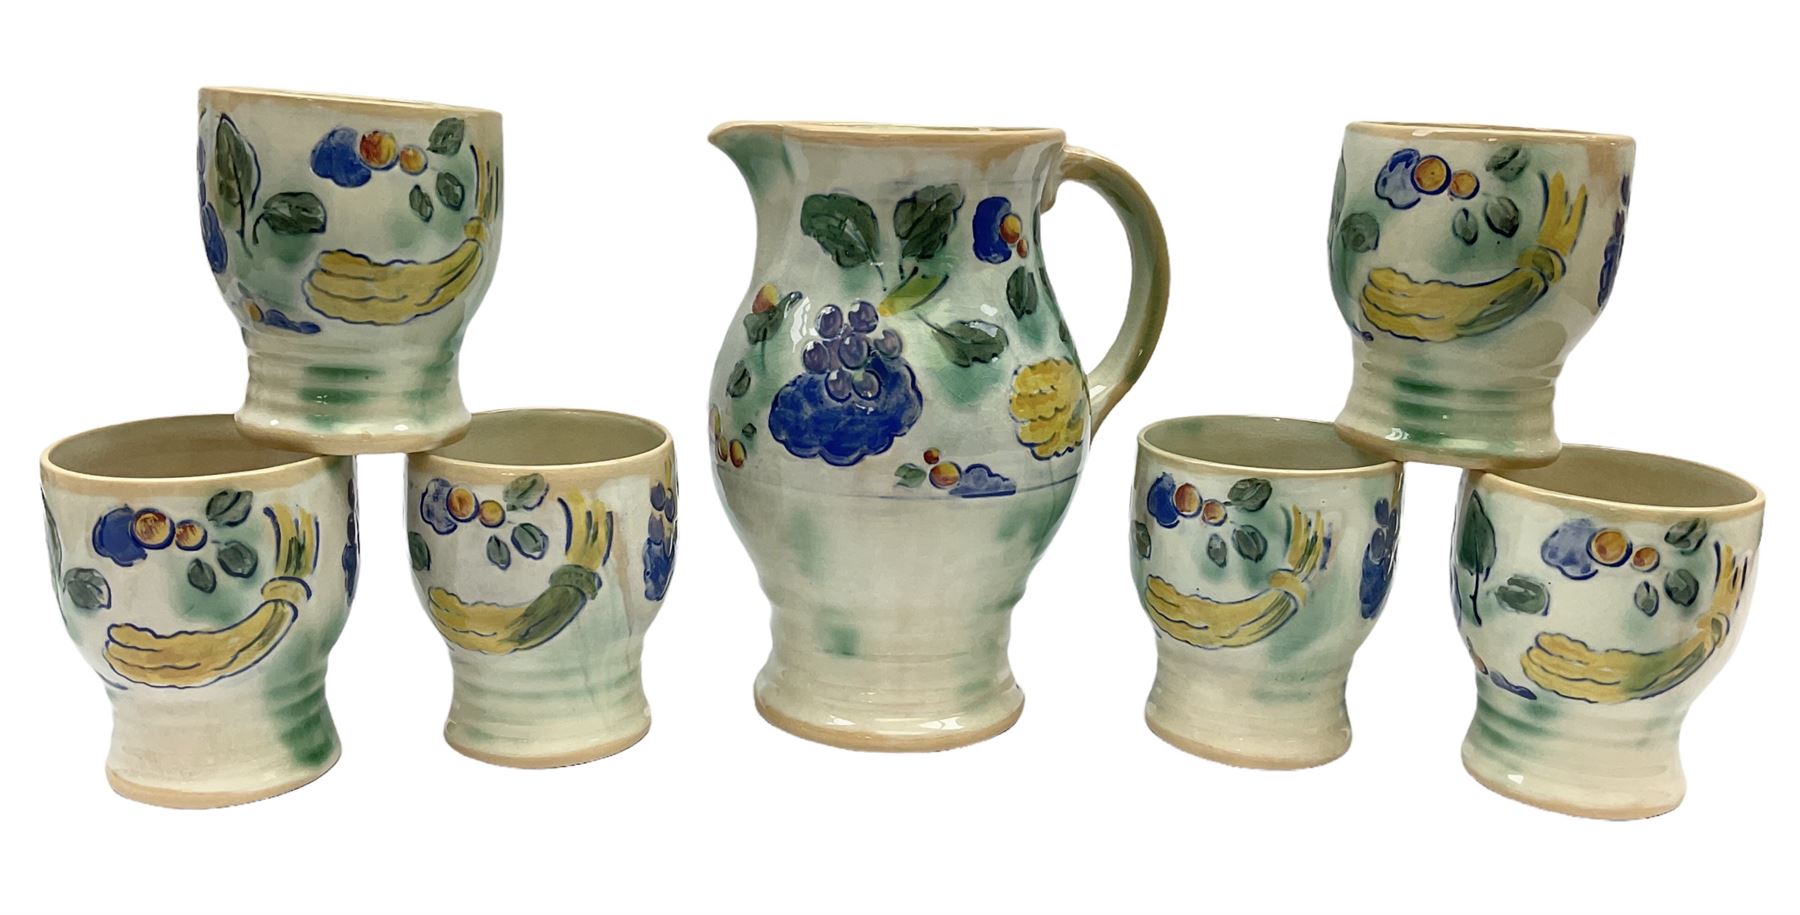 Early 20th century Royal Doulton Brangwyn Ware jug and set of six beakers